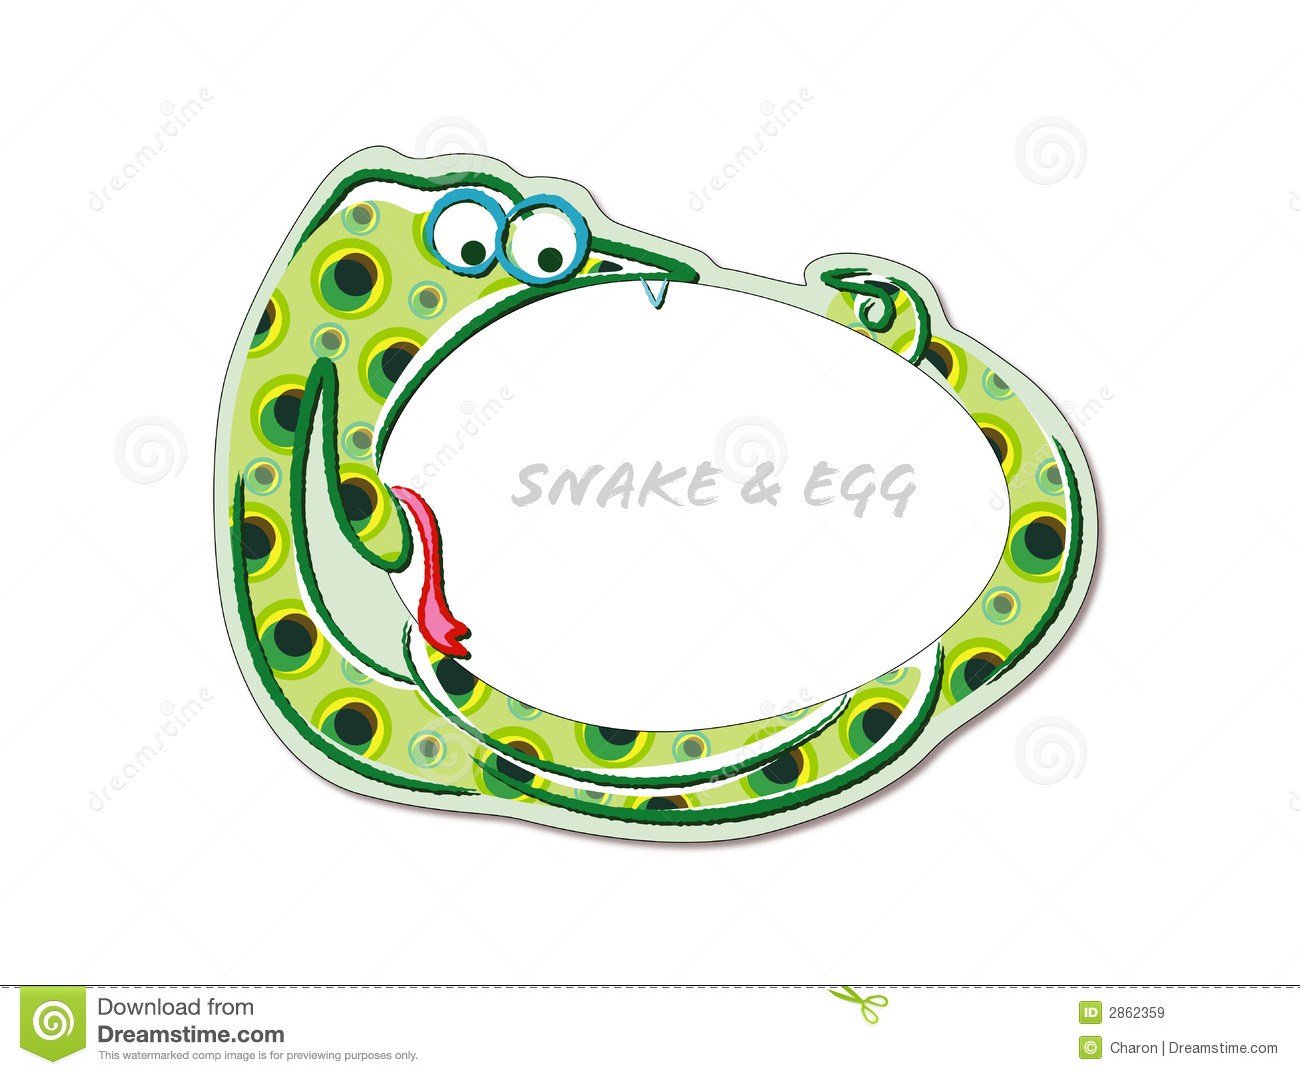 Snake Biting An Egg Cute Cartoon Royalty Free Stock Images   Image